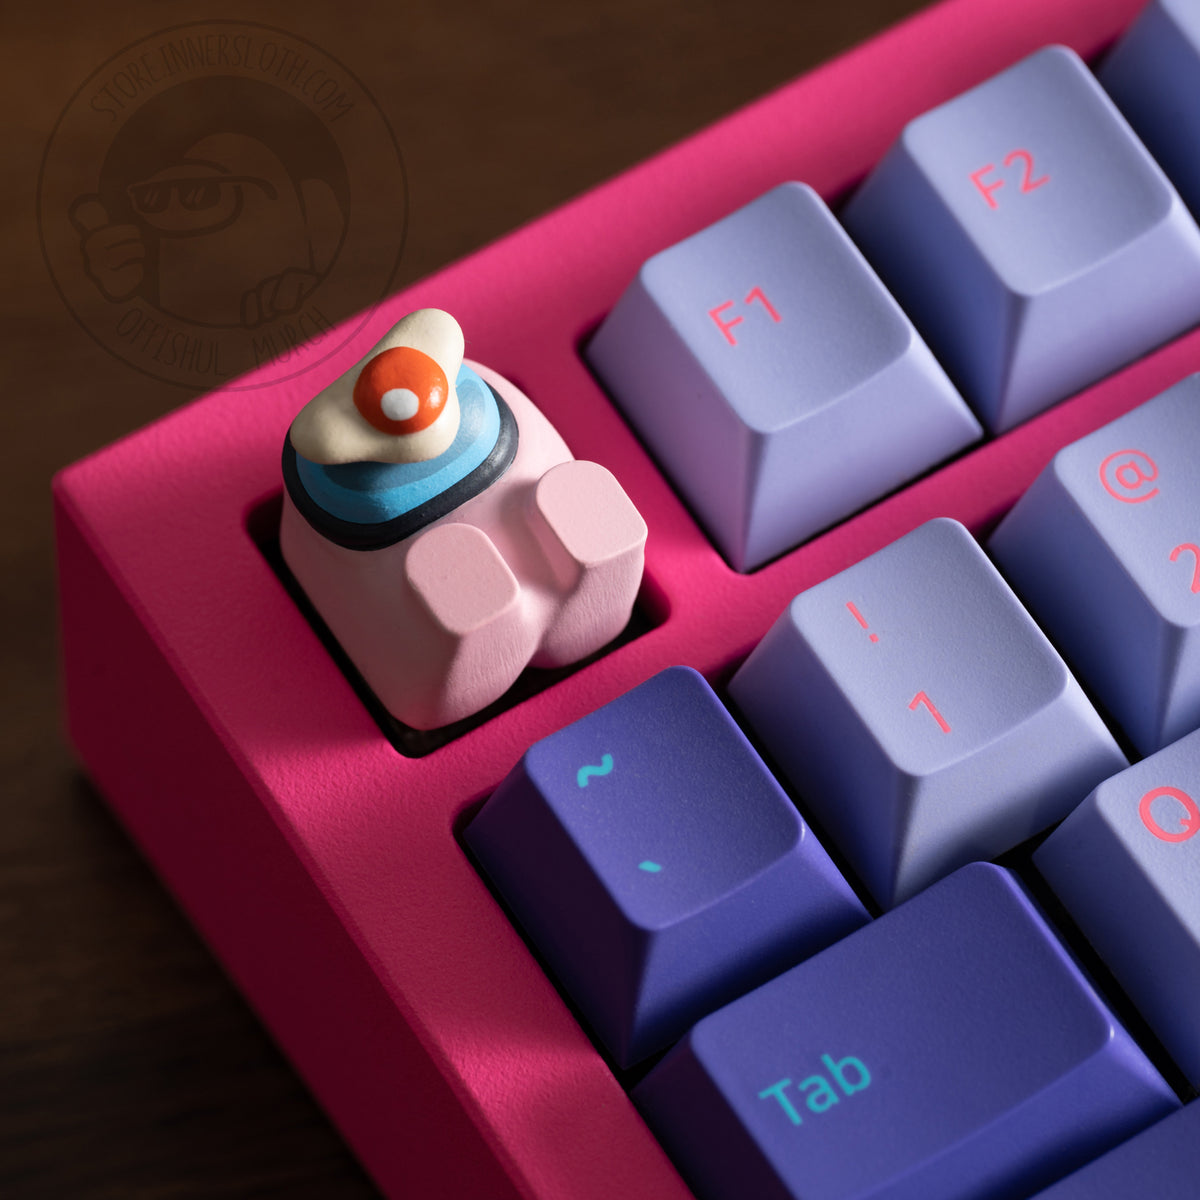 A lifestyle photo of the rose crewmate keycap taking the place of the escape key on a pink keyboard. The keycap figure lays on its back, and is shown with a fried egg over its visor.